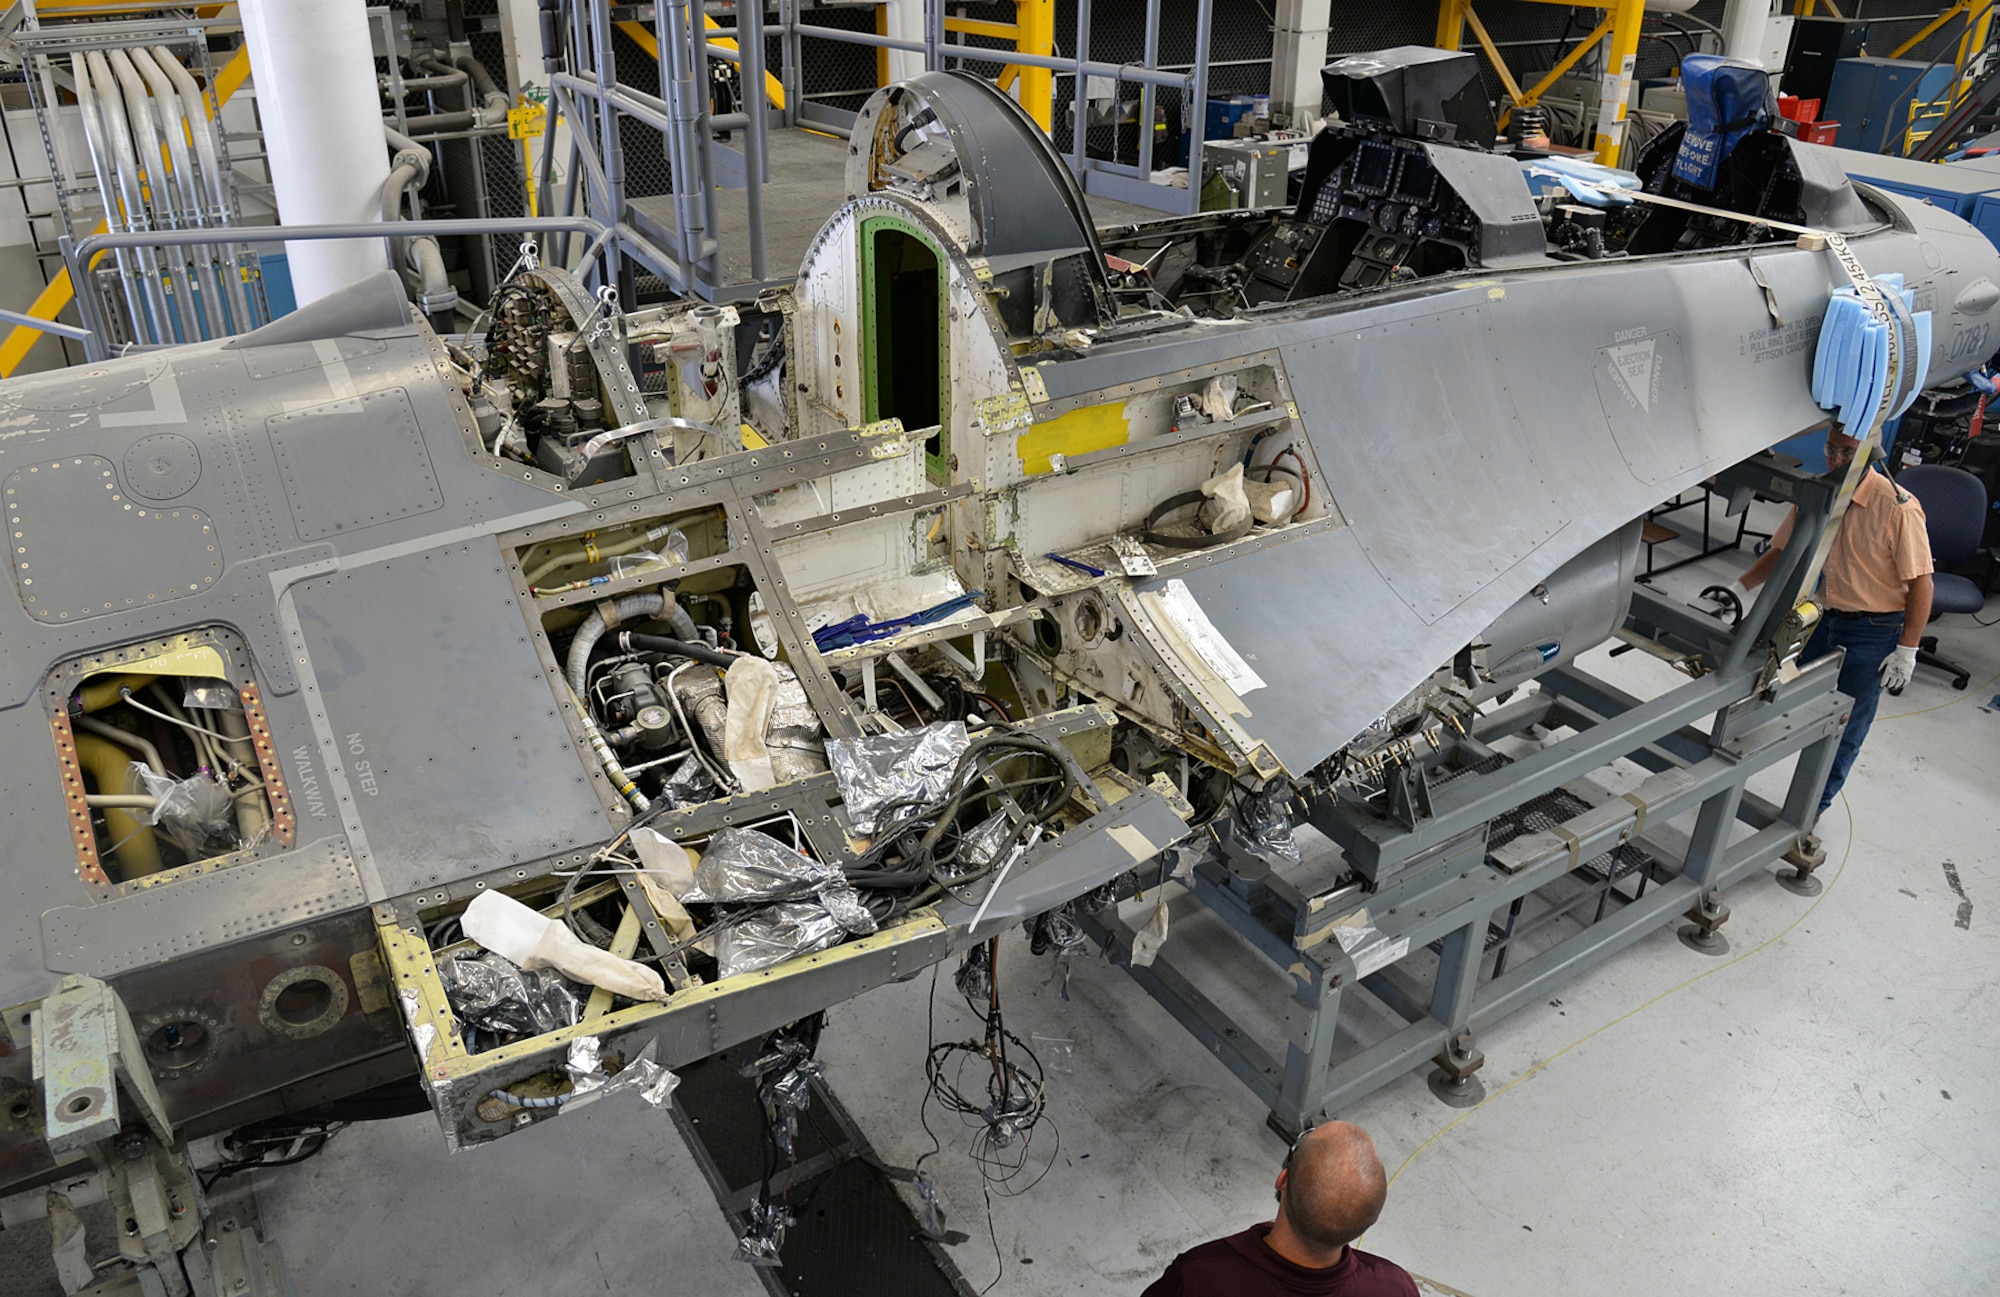 J. C. Robinson (far right), 576th Aircraft Maintenance Squadron, turns the wheel on a special jig to separate the fuselage on F-16D, 90-0783, on Aug. 03, 2017, at Hill Air Force Base, Utah. The aircraft was involved in a bird strike and during its post-flight inspection the crew chief discovered the 243 bulkhead had a large crack. It was determined that the only possible way of repairing the airframe was to separate it into two sections. (U.S. Air Force photo by Alex R. Lloyd)